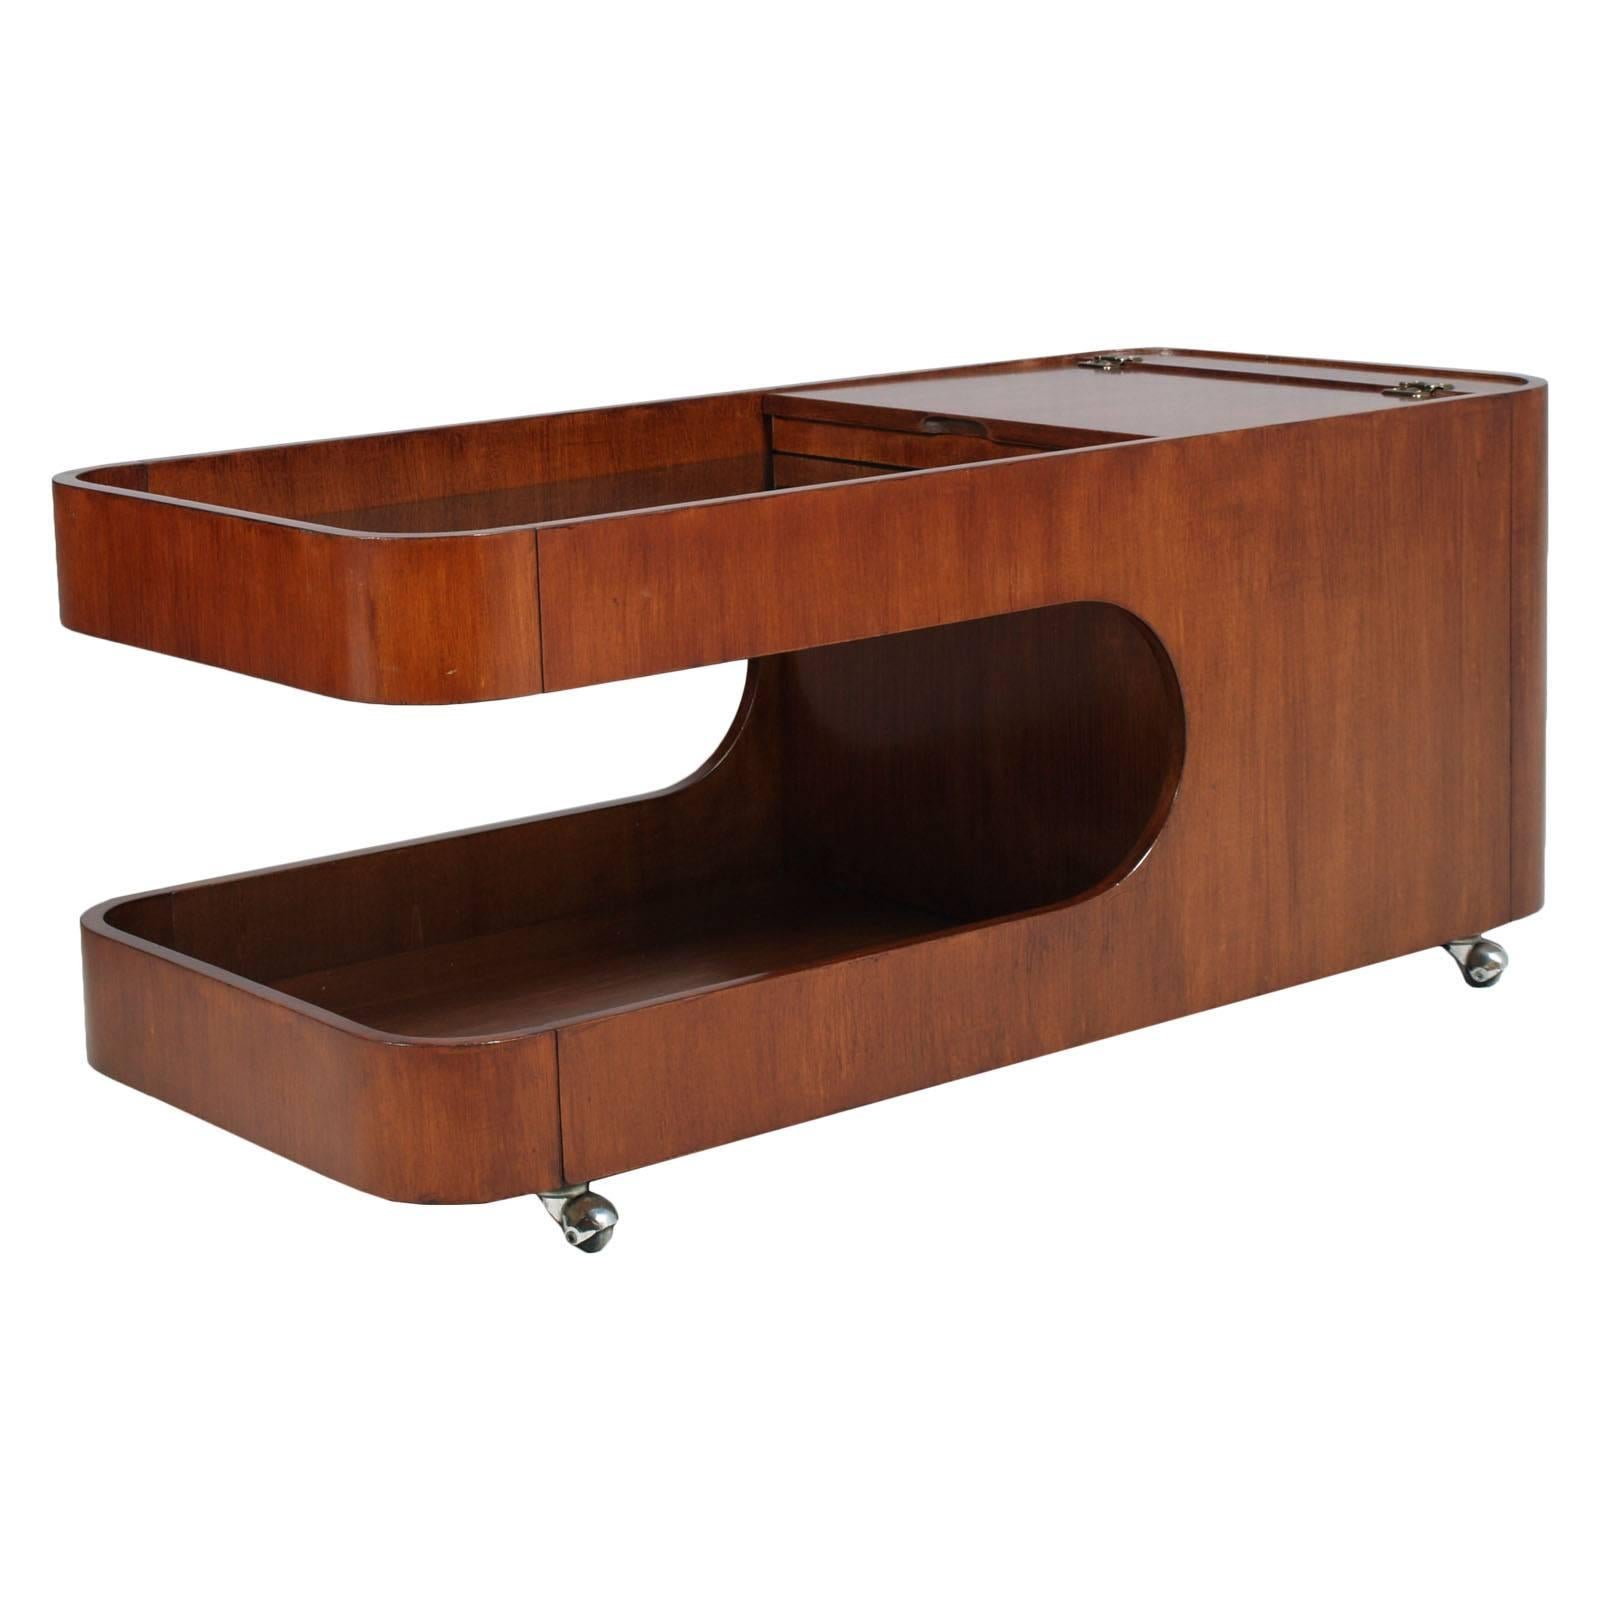 Italian Mid-Century Modern trolley coffee table, dry bar cart, magazine rack, Afra e Tobia Scarpa attributable. In mahogany and walnut,  polished to wax. A furniture high-design multi function.

Measures cm: H 47, W 110, D 50 (H37 \29 internal).